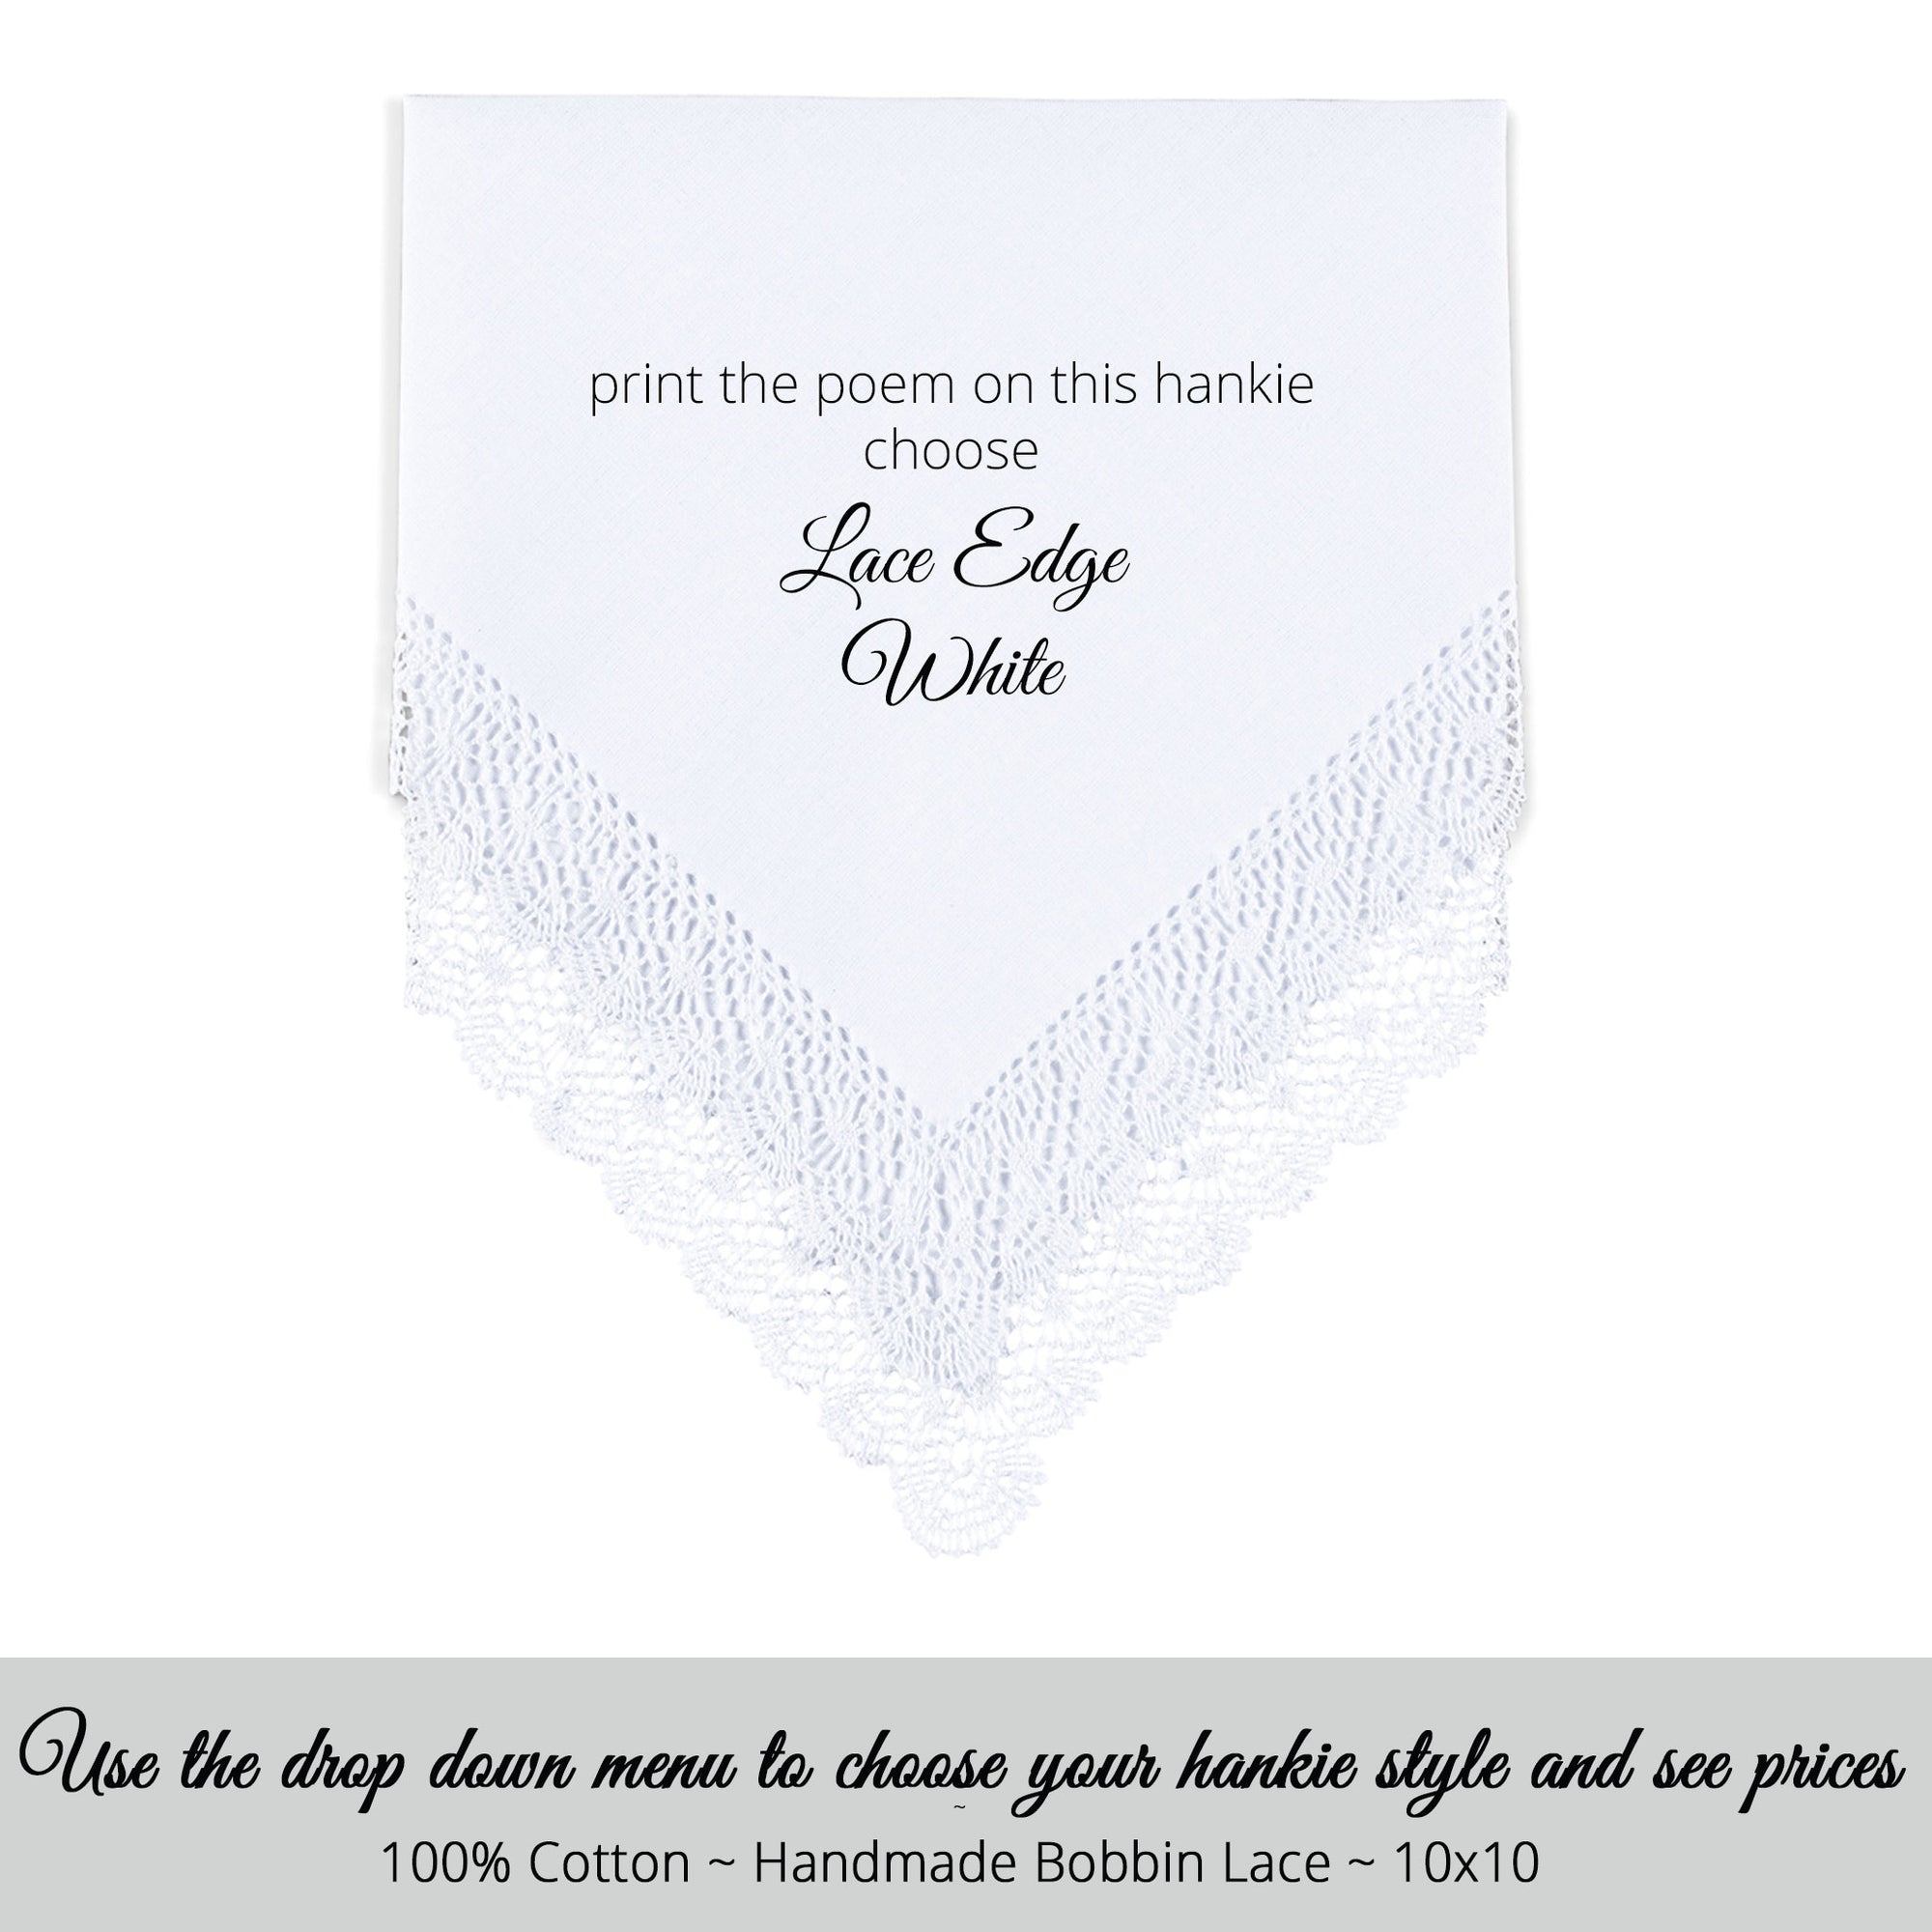 Poem Printed Wedding Hankie for the Mother of the Bride from the Bride "My Guiding Star"